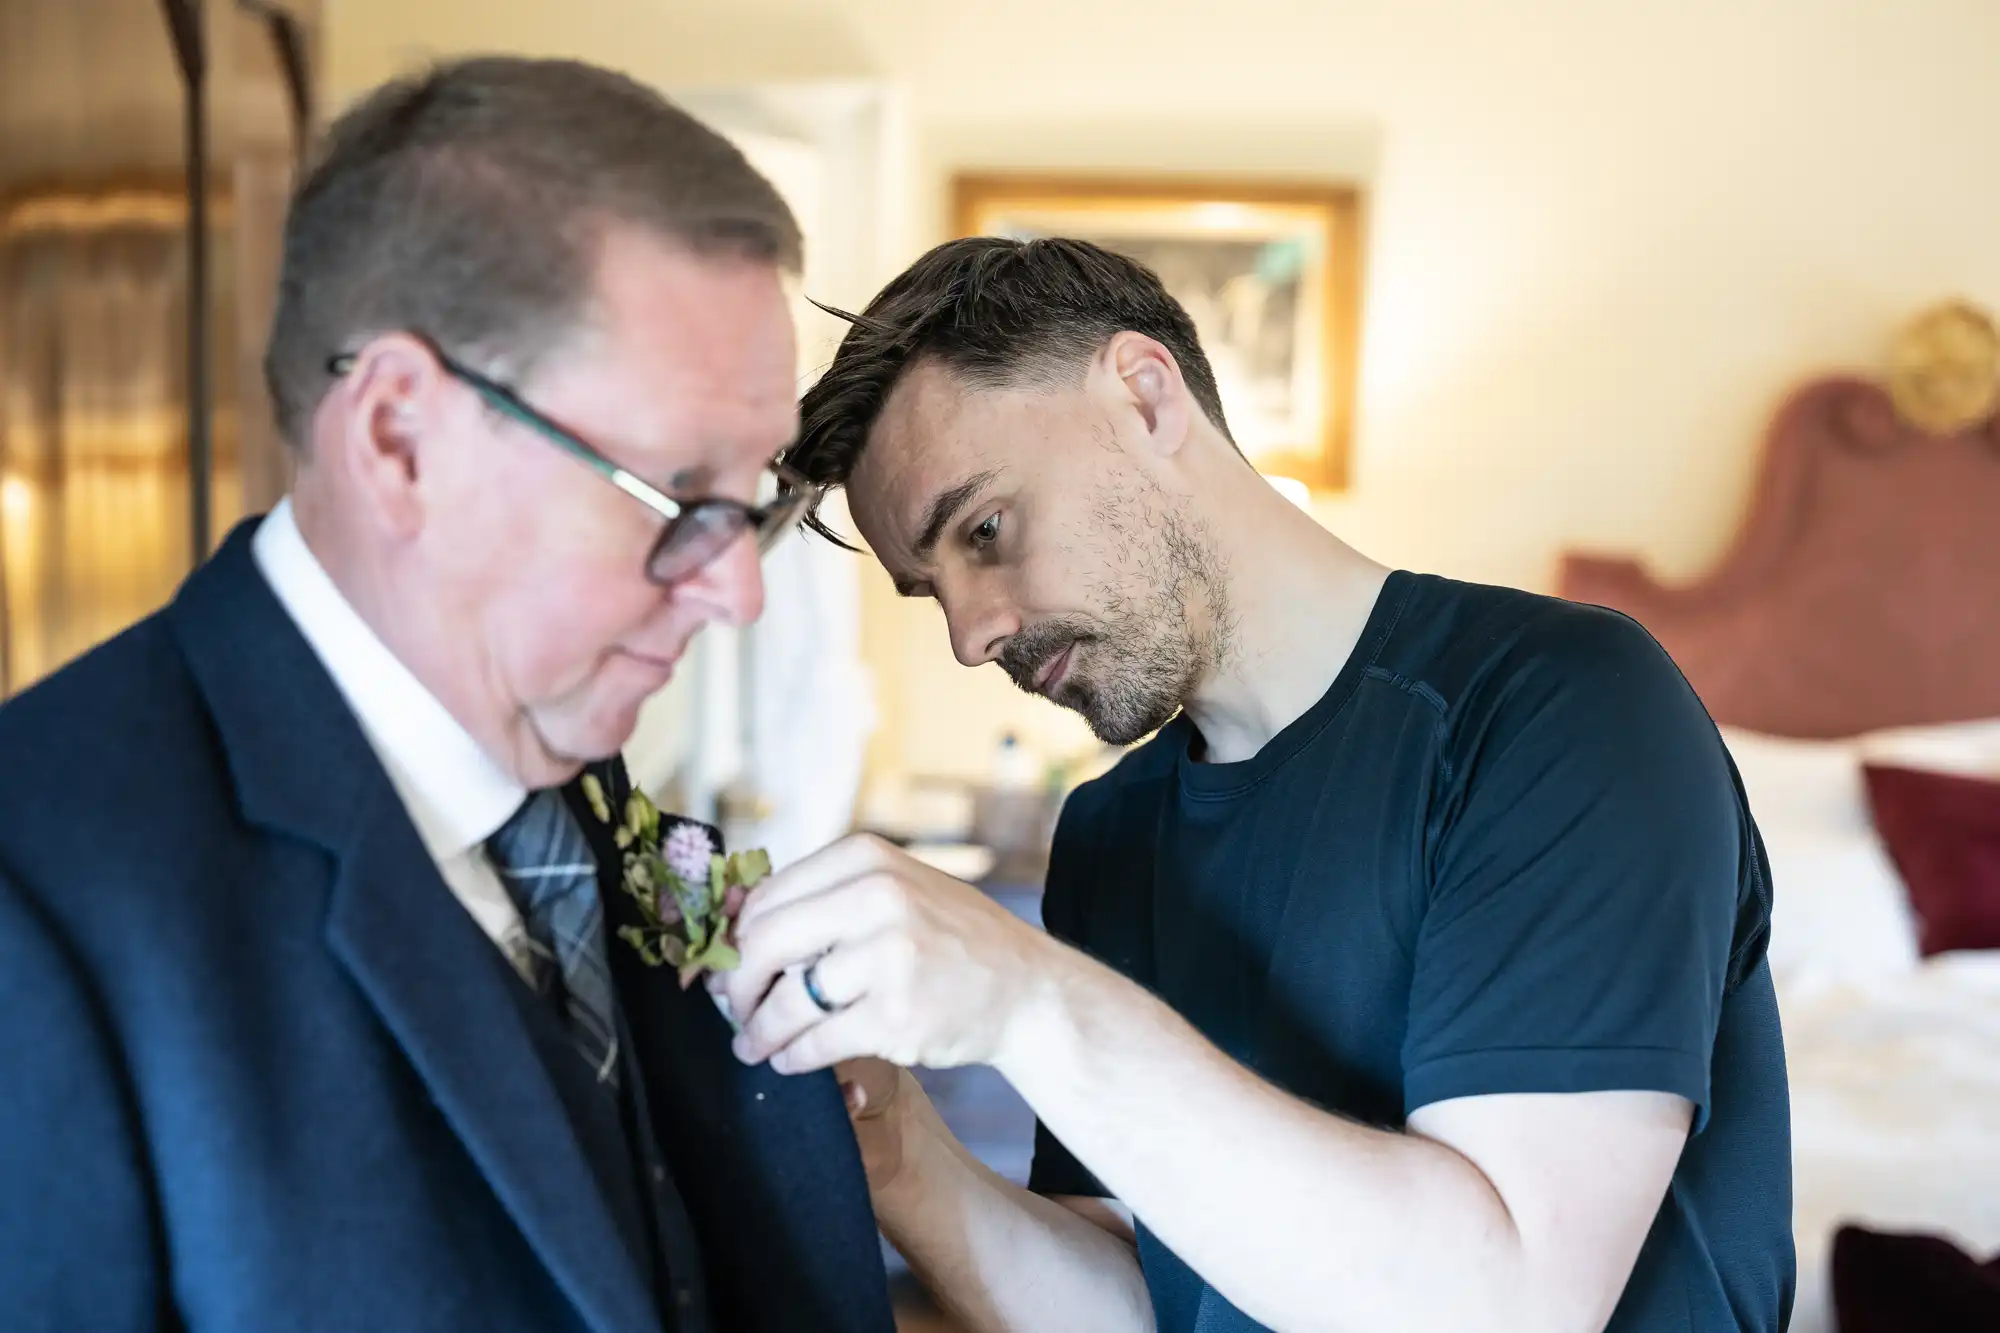 A man adjusts a boutonniere on the lapel of an older man’s suit jacket in a warmly lit room.